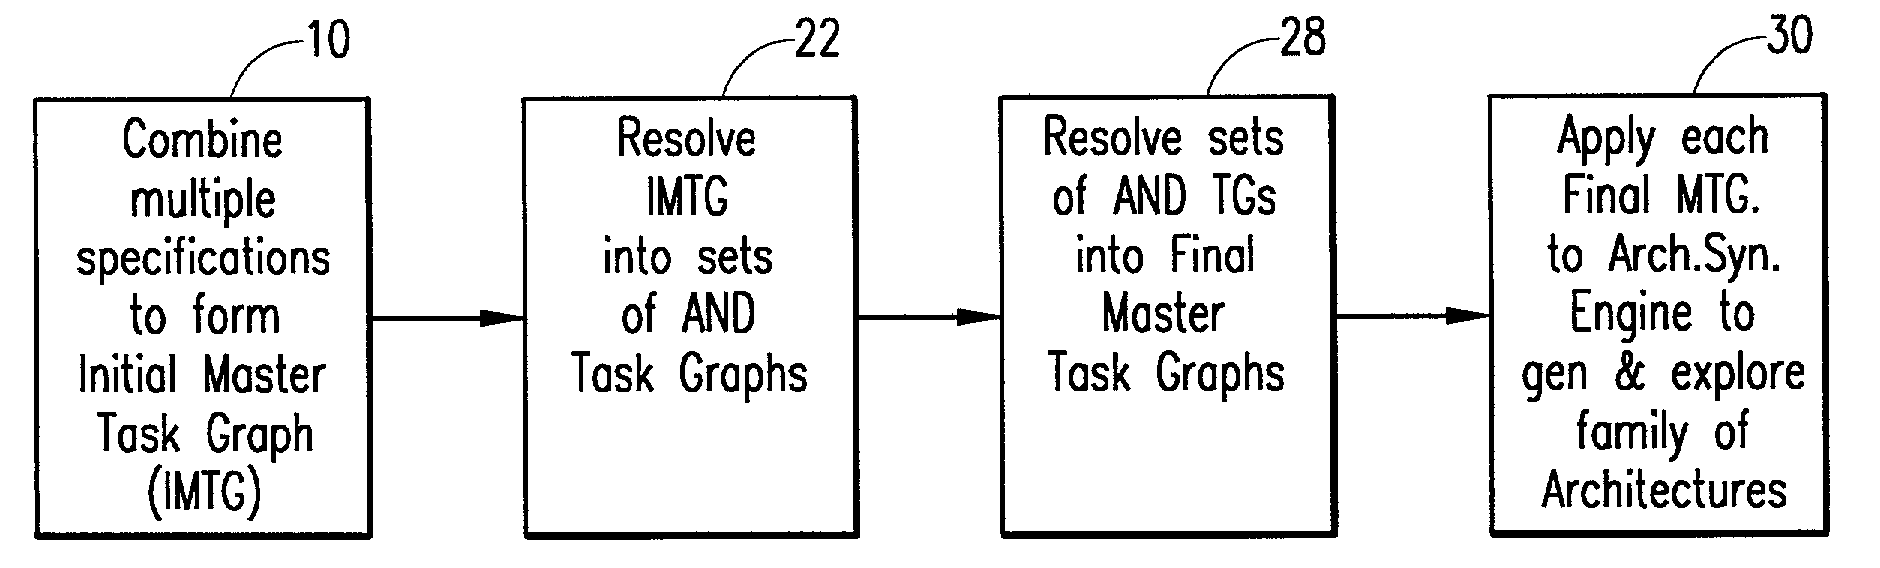 System architecture synthesis and exploration for multiple functional specifications